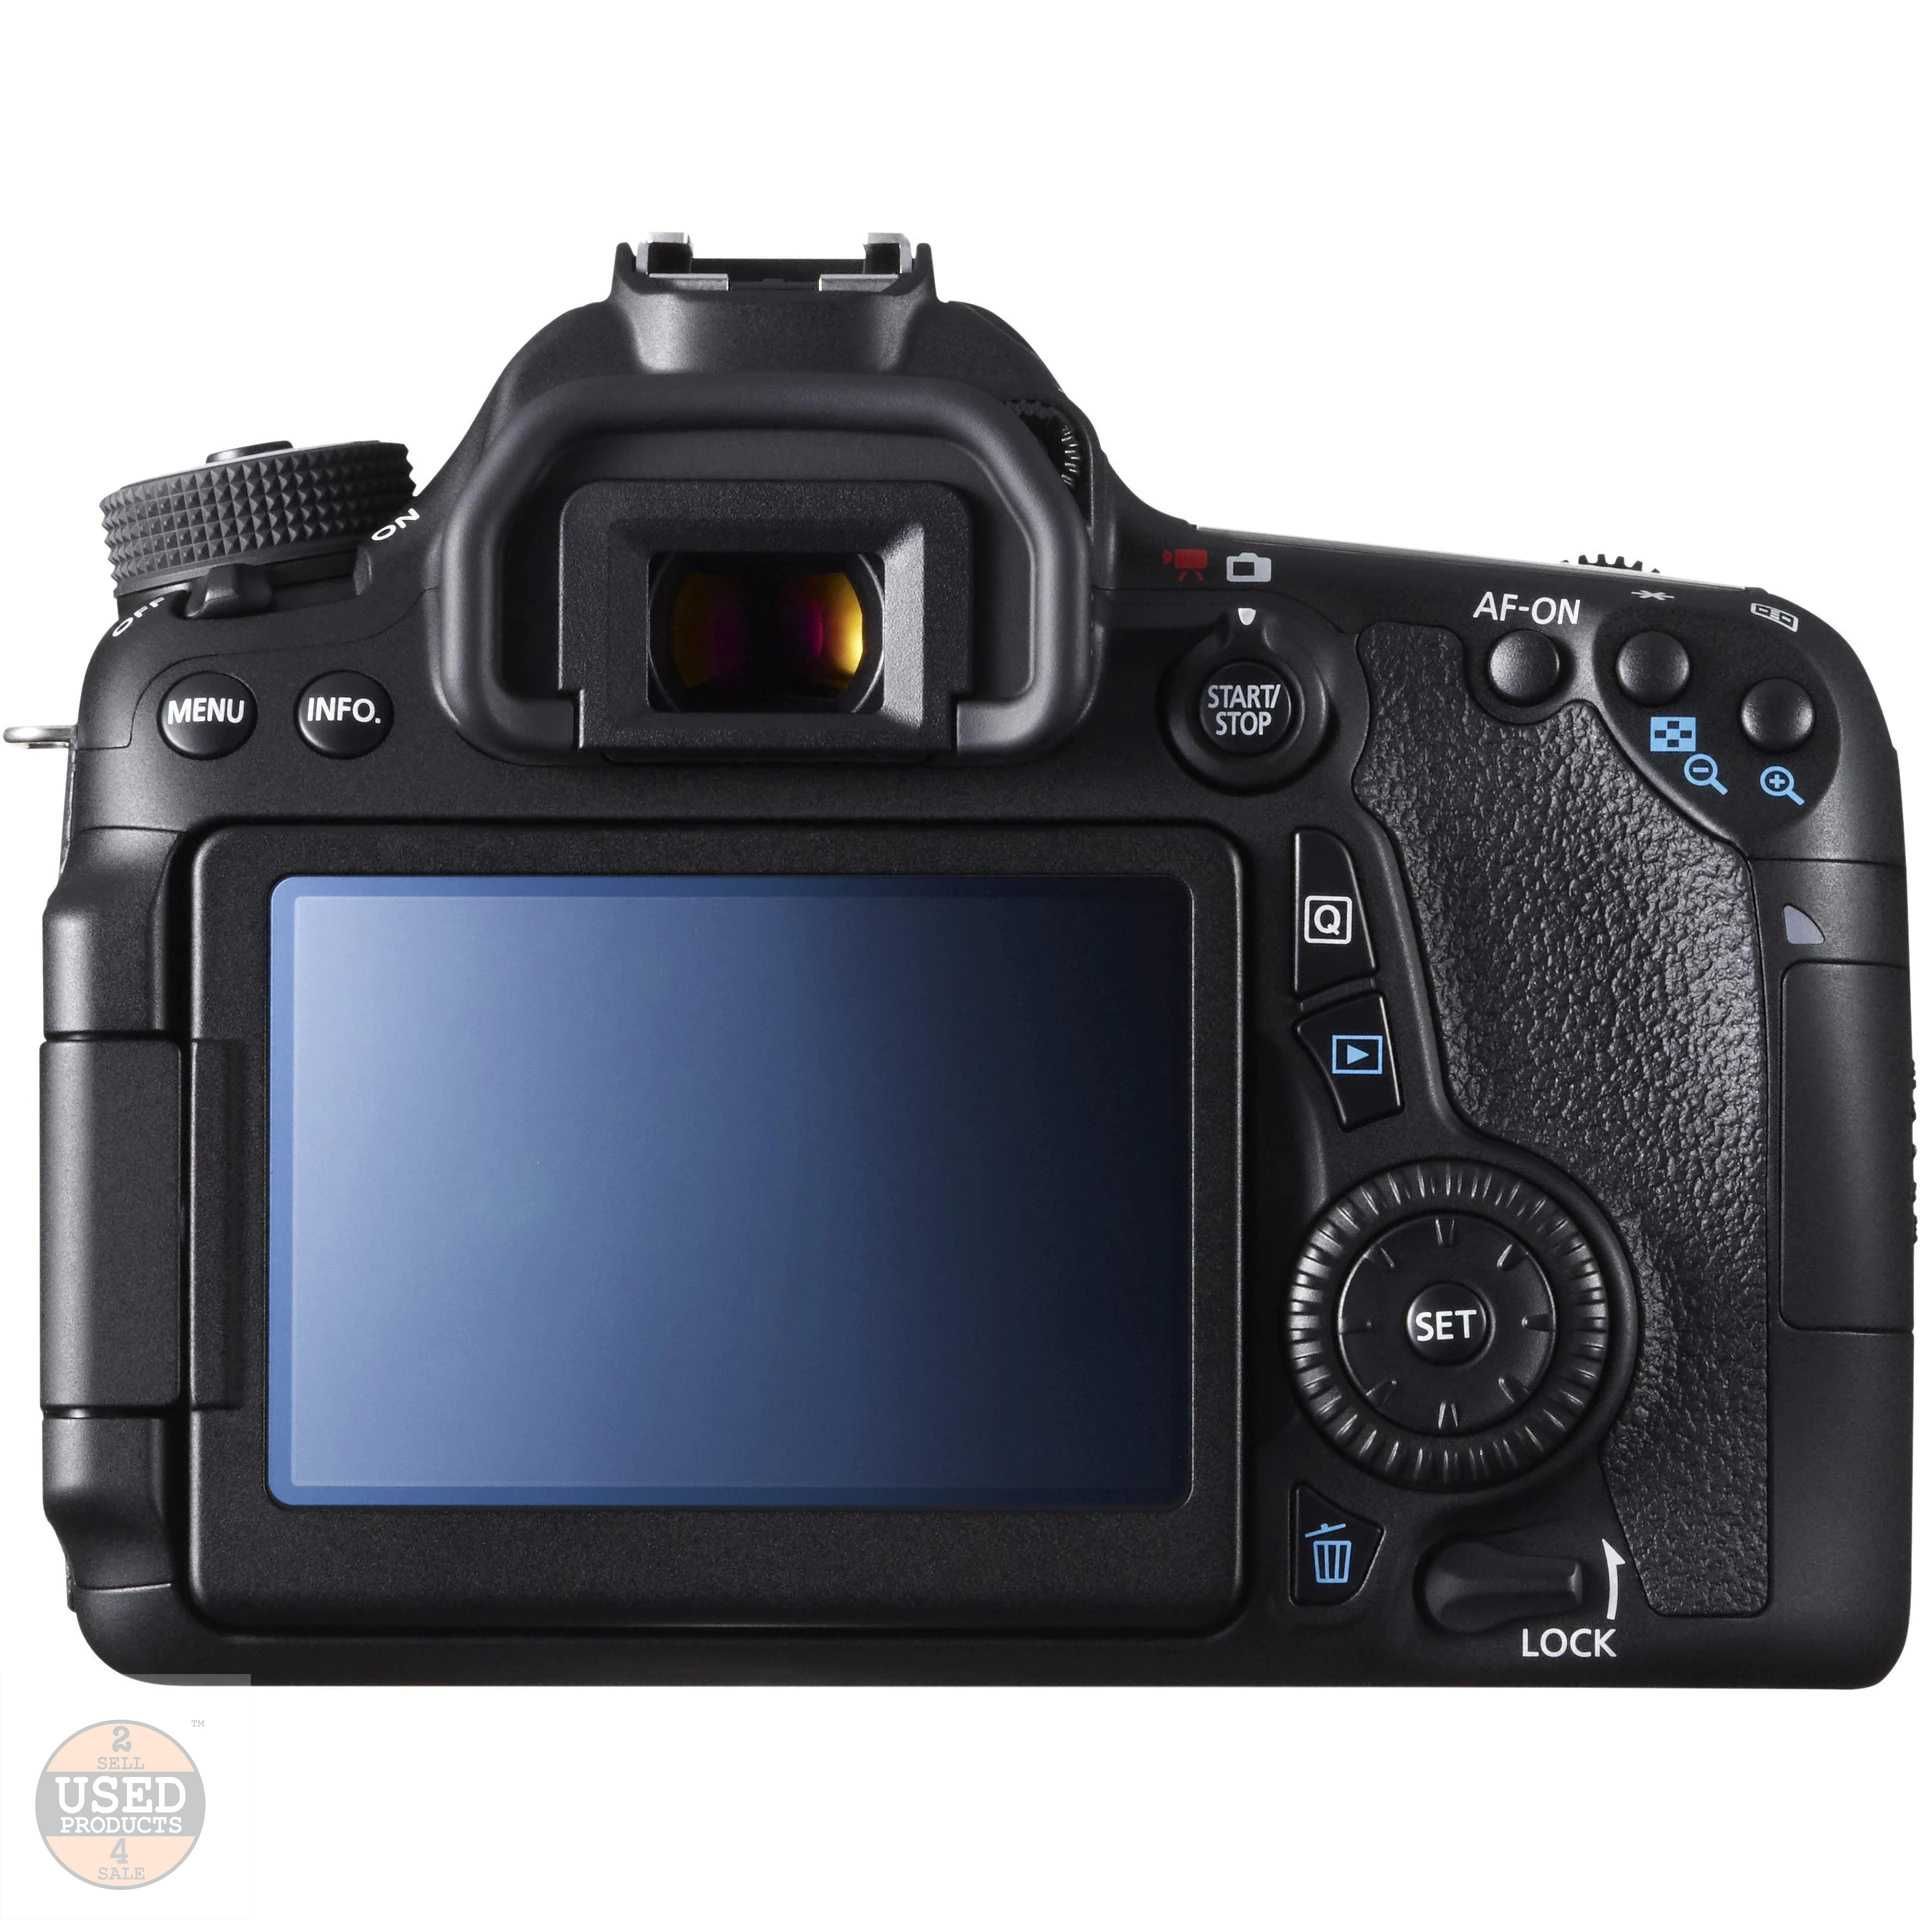 Aparat foto DSLR Canon EOS 70D, 20.2 Mp, Wi-Fi | UsedProducts.ro